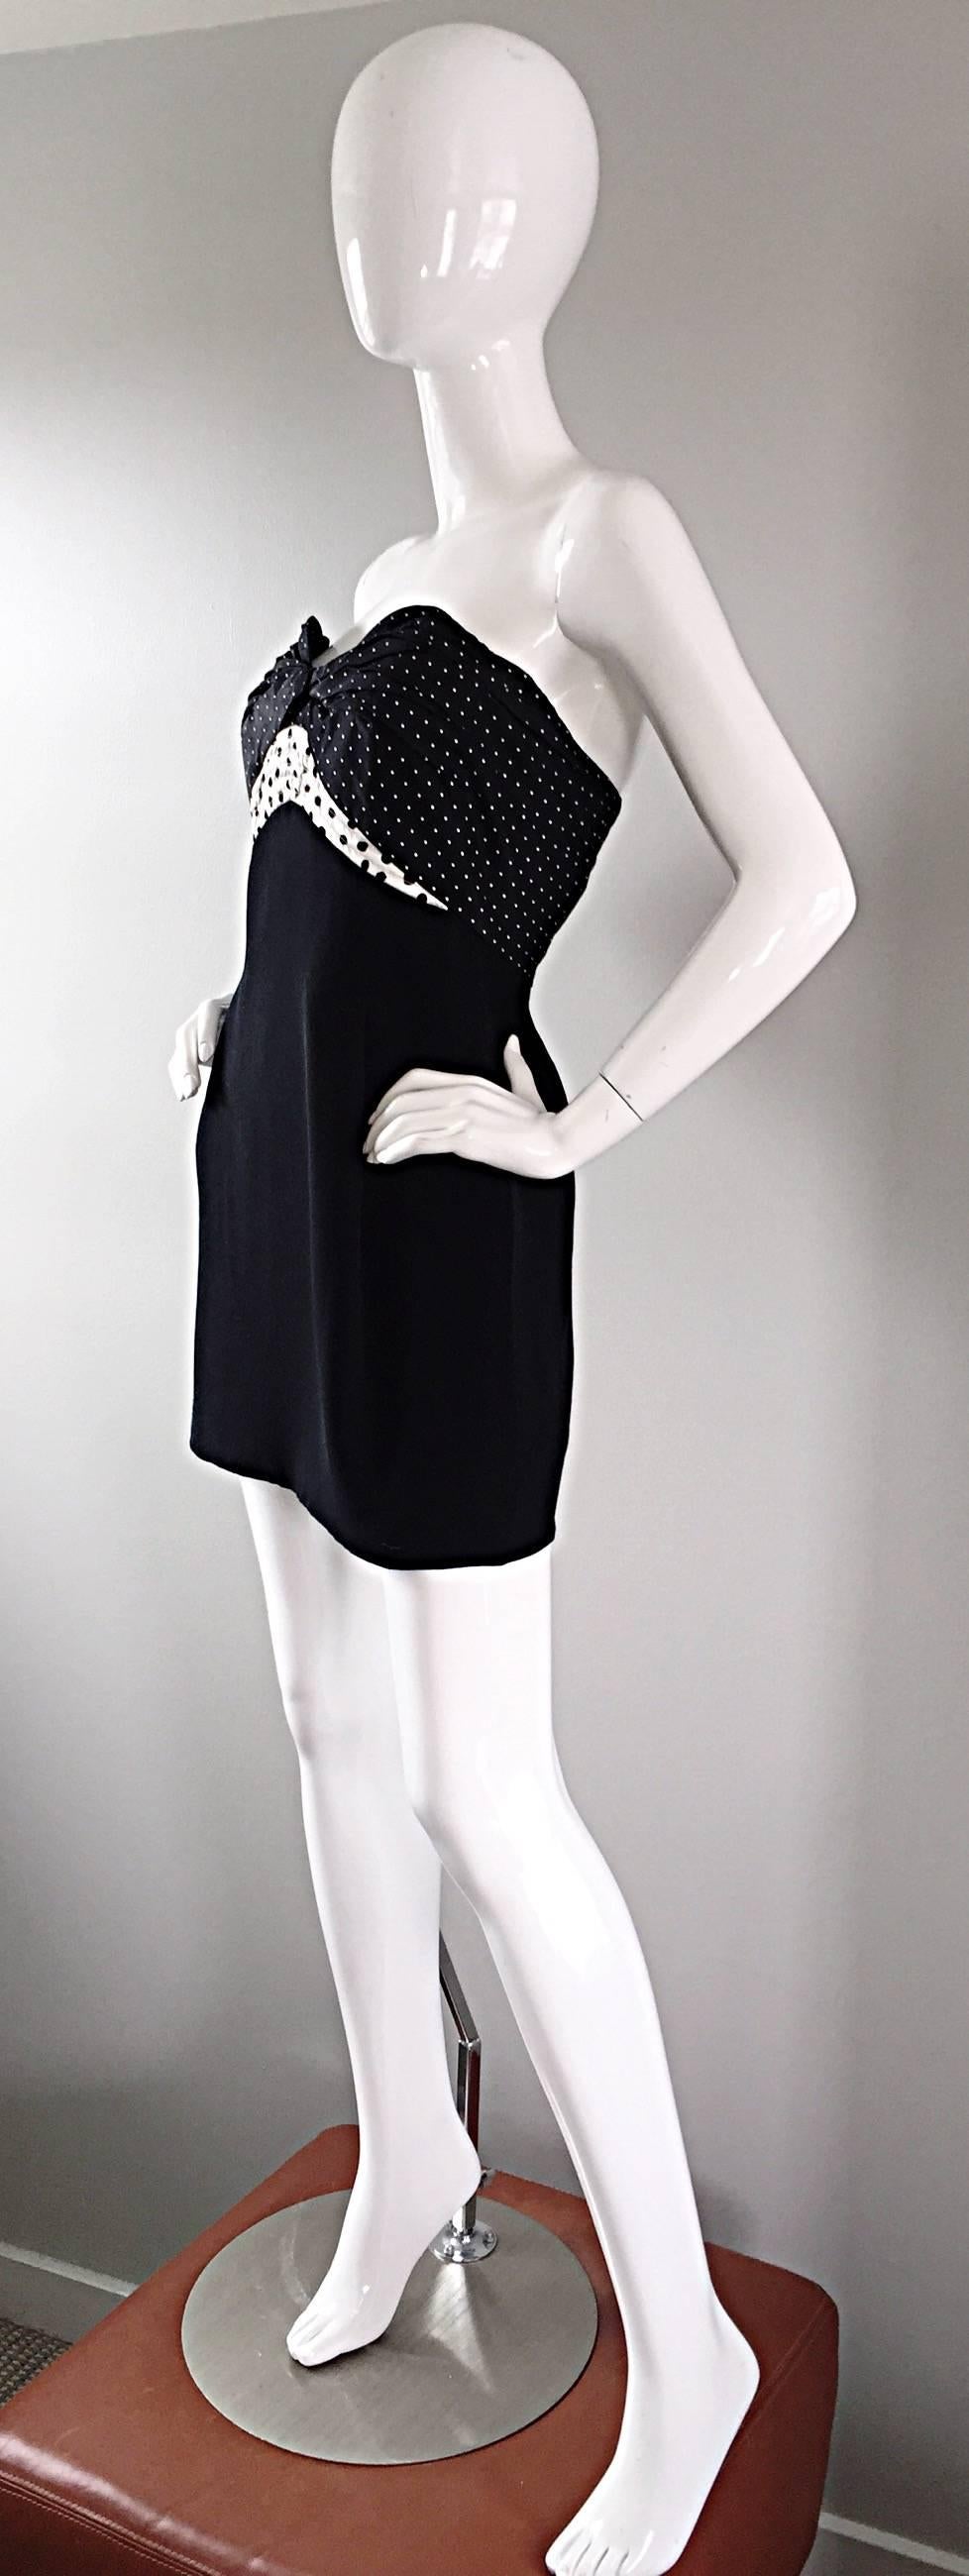 Vintage Geoffrey Beene 1990s Black and White Polka Dot Vintage Strapless Dress  In Excellent Condition For Sale In San Diego, CA